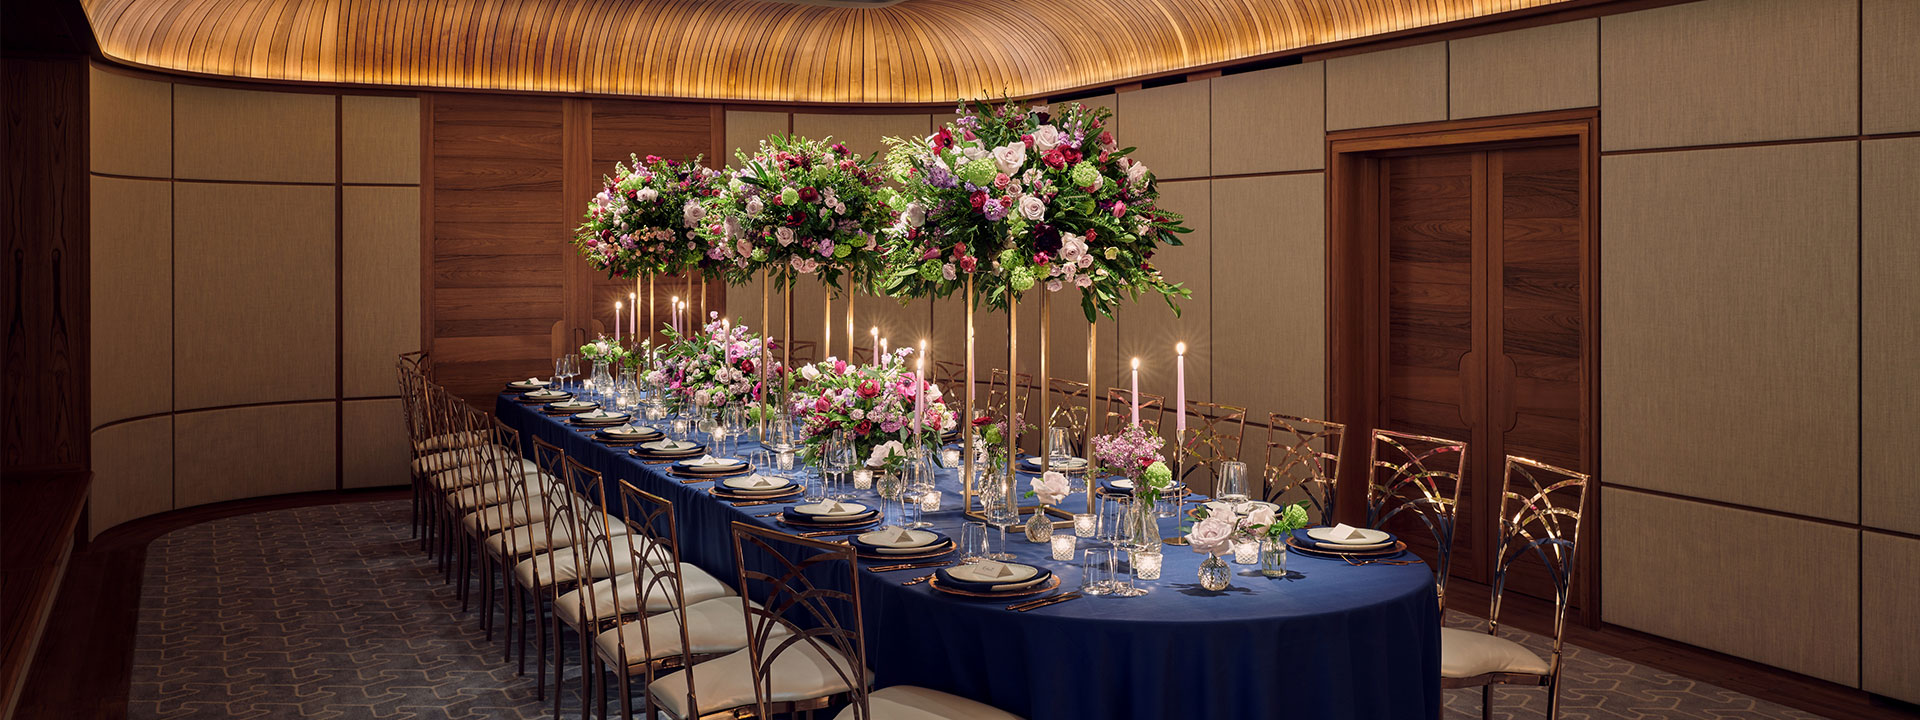 A richly decorated table with flowers and candles, on a blue tablecloth with golden chairs in The Wilton Room.